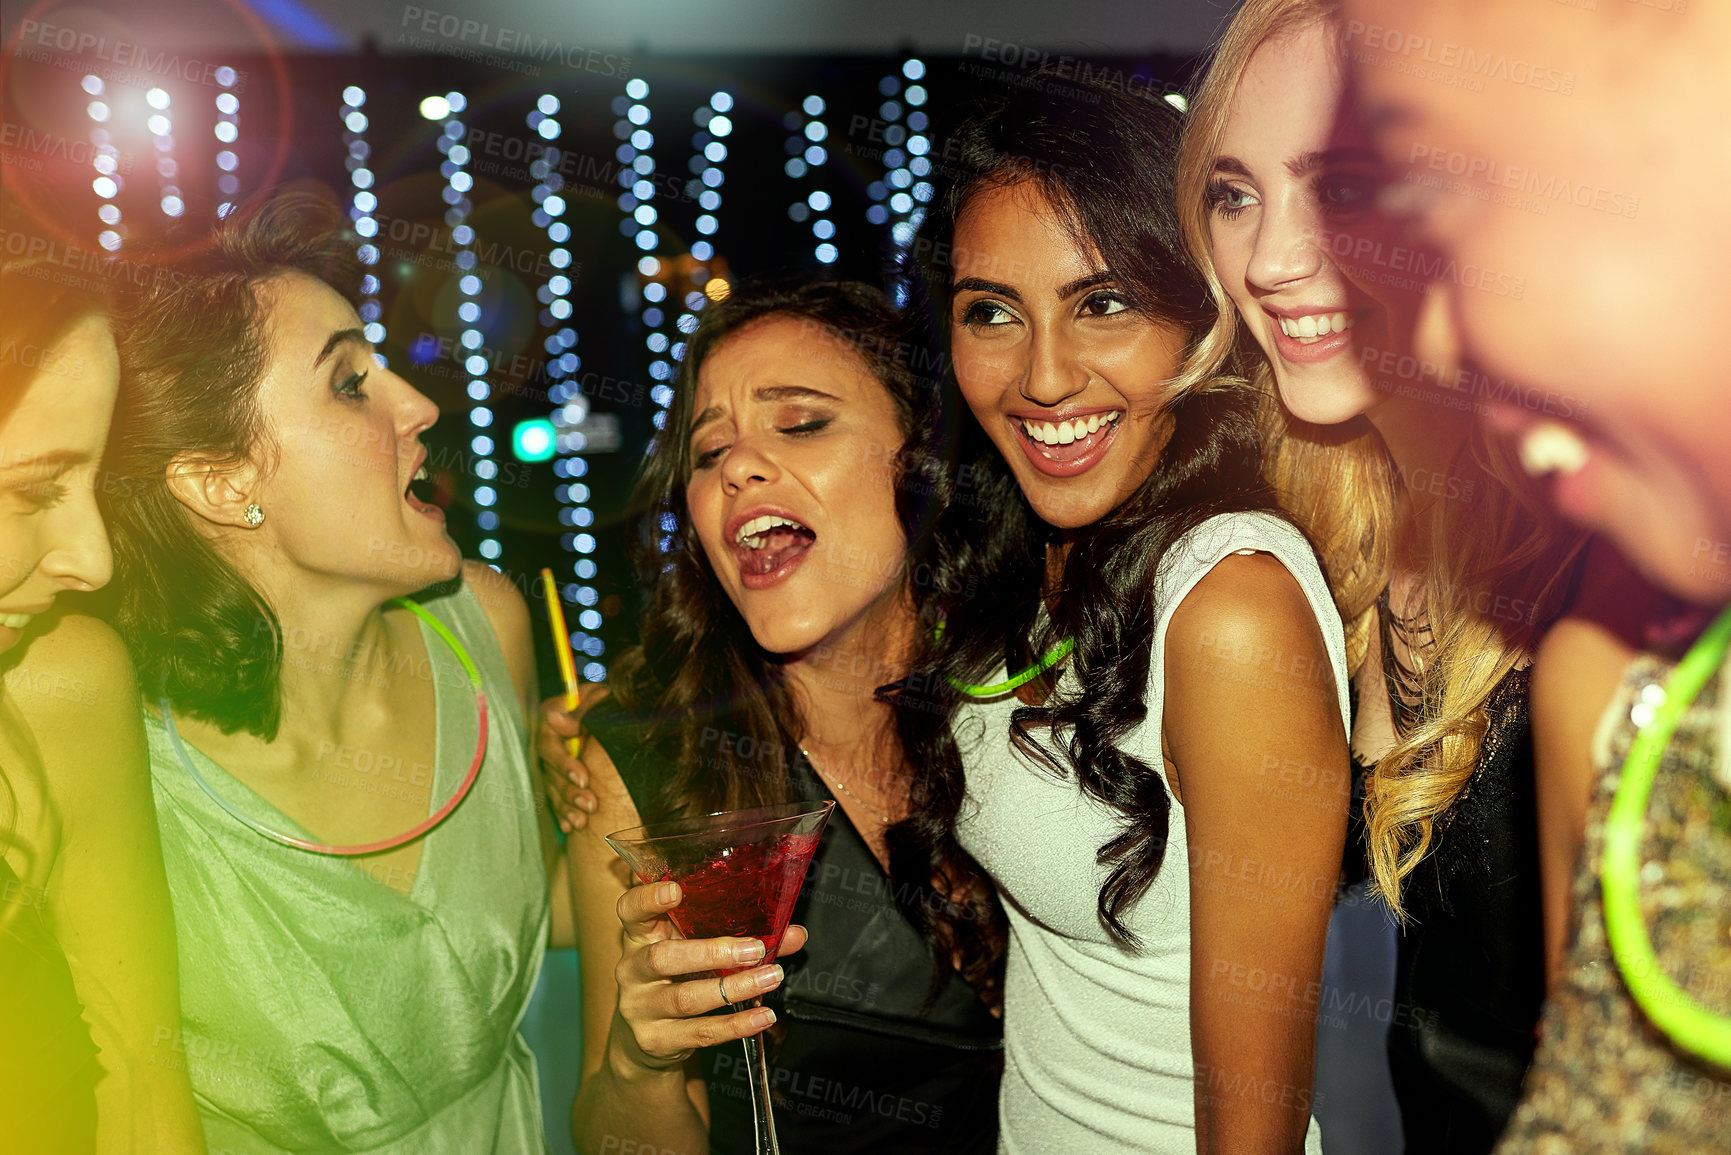 Buy stock photo Shot of a group of young people enjoying themselves at a nightclub